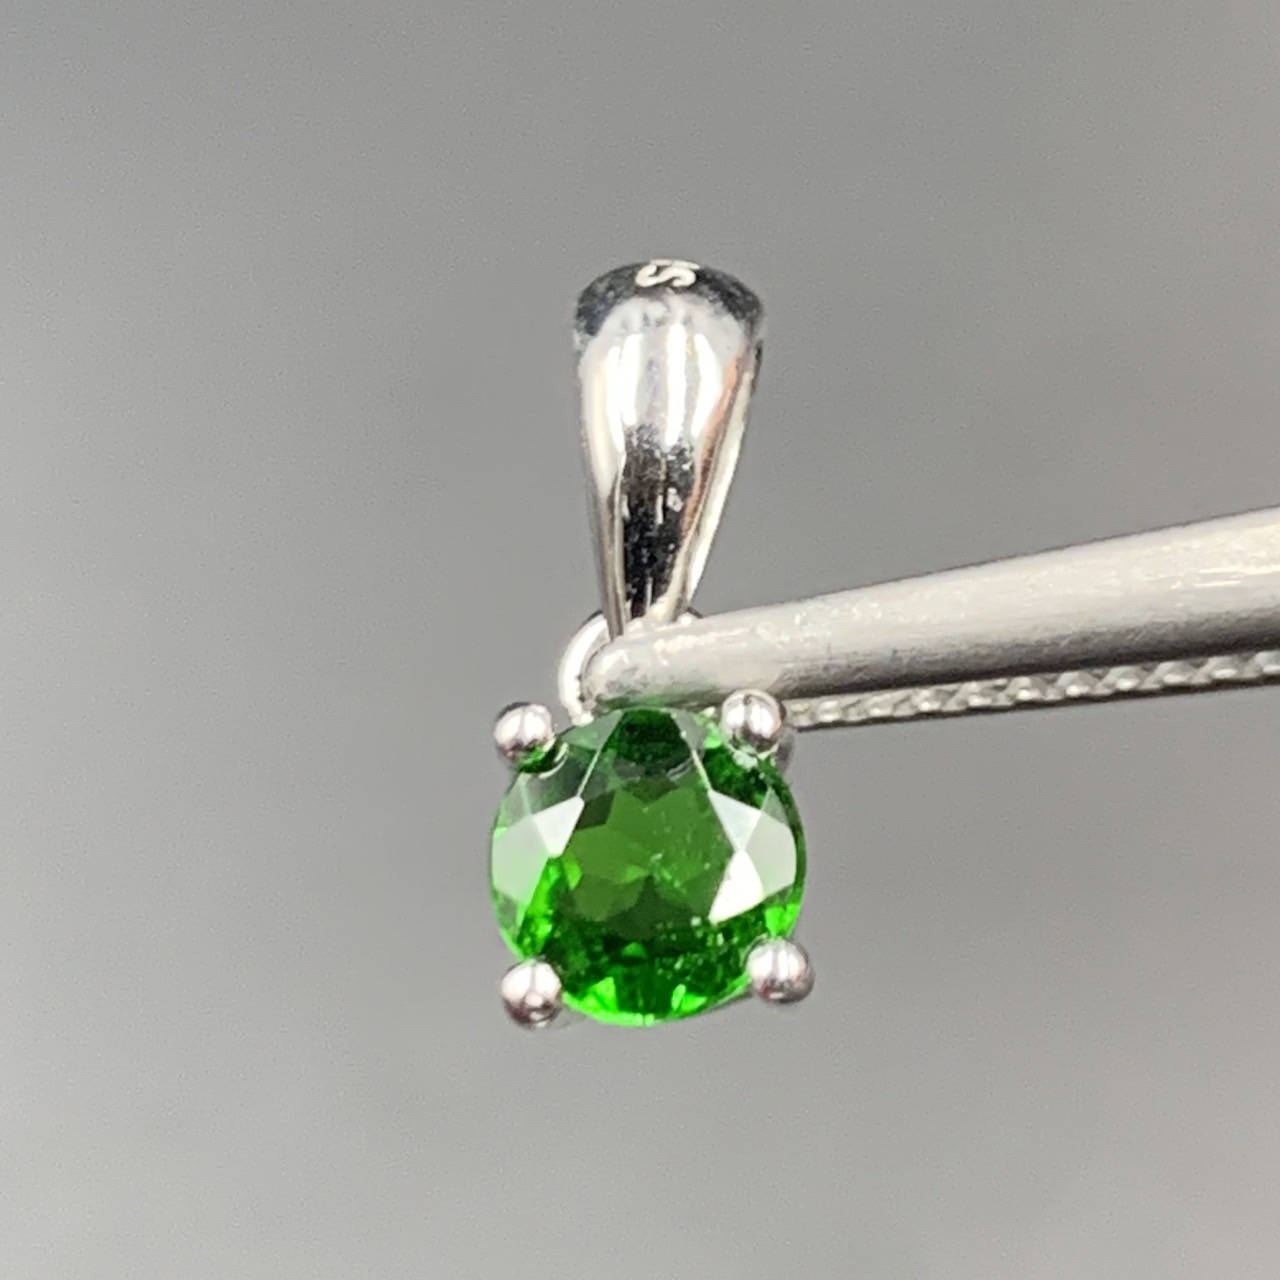 Awesome Natural Rare Chrome Diopside With Silver Pendant - Image 2 of 4